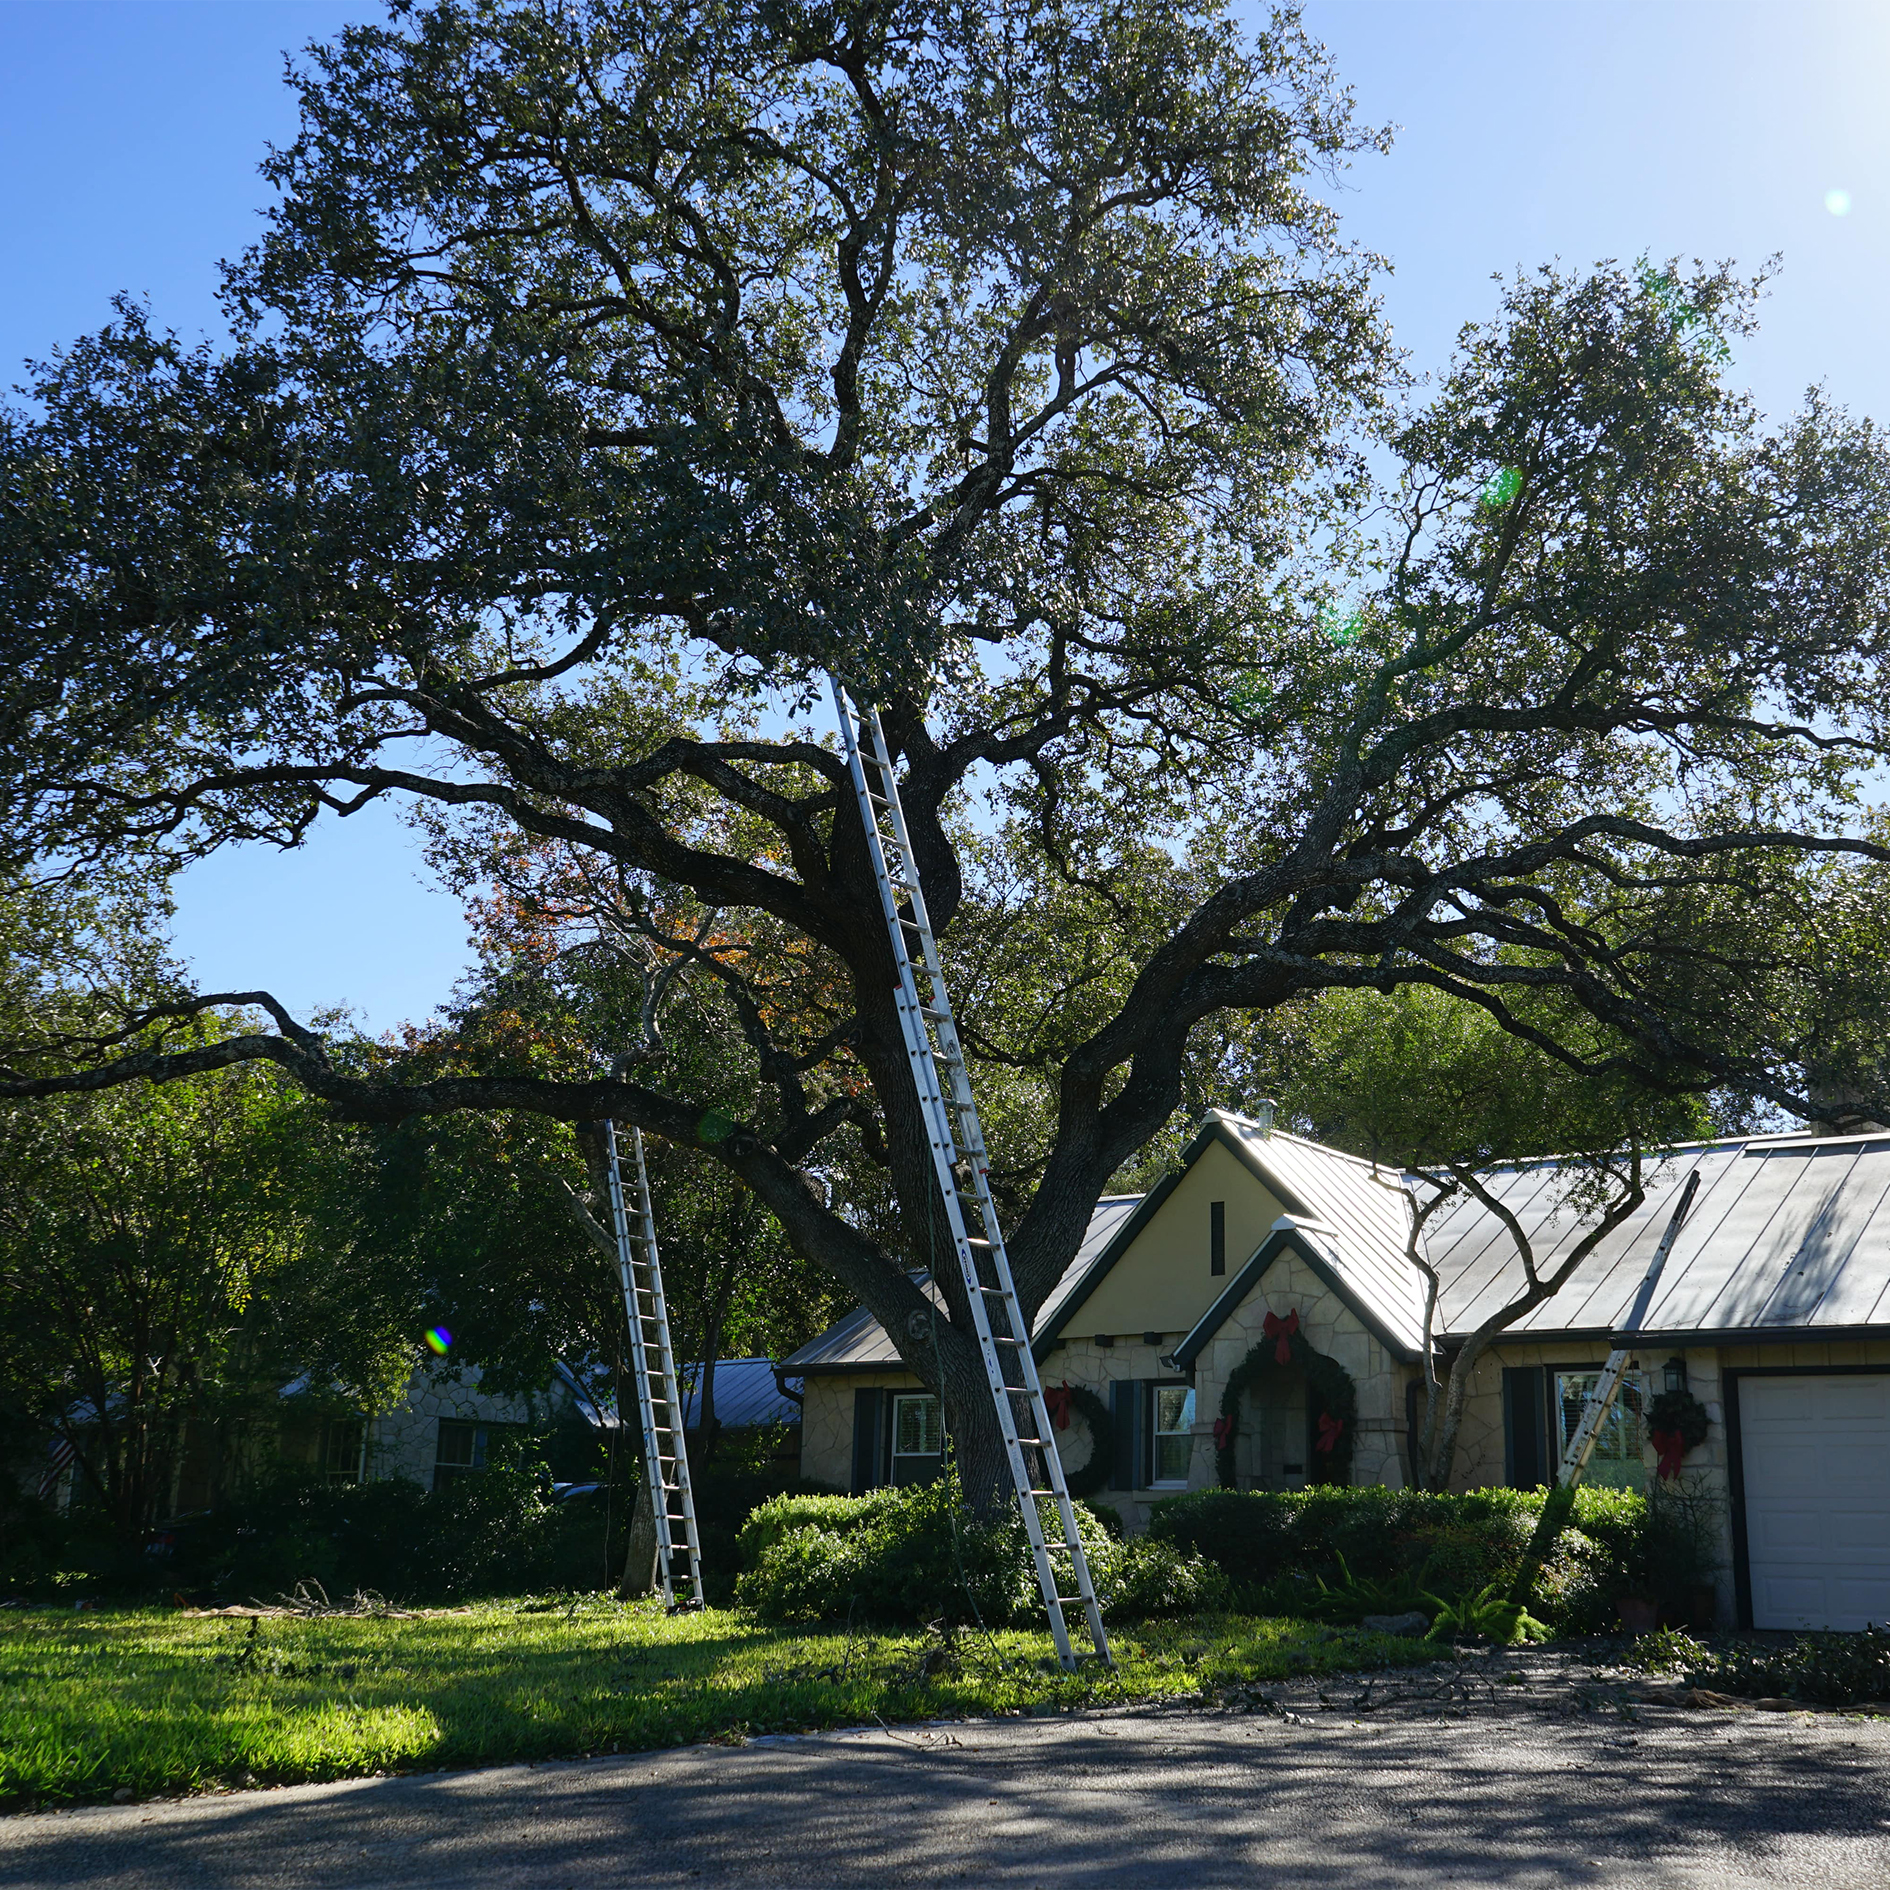 Explore our comprehensive tree care services designed to enhance the vitality and aesthetics of your trees. Our certified arborists provide expert care, ensuring the long-term health of your precious green assets.